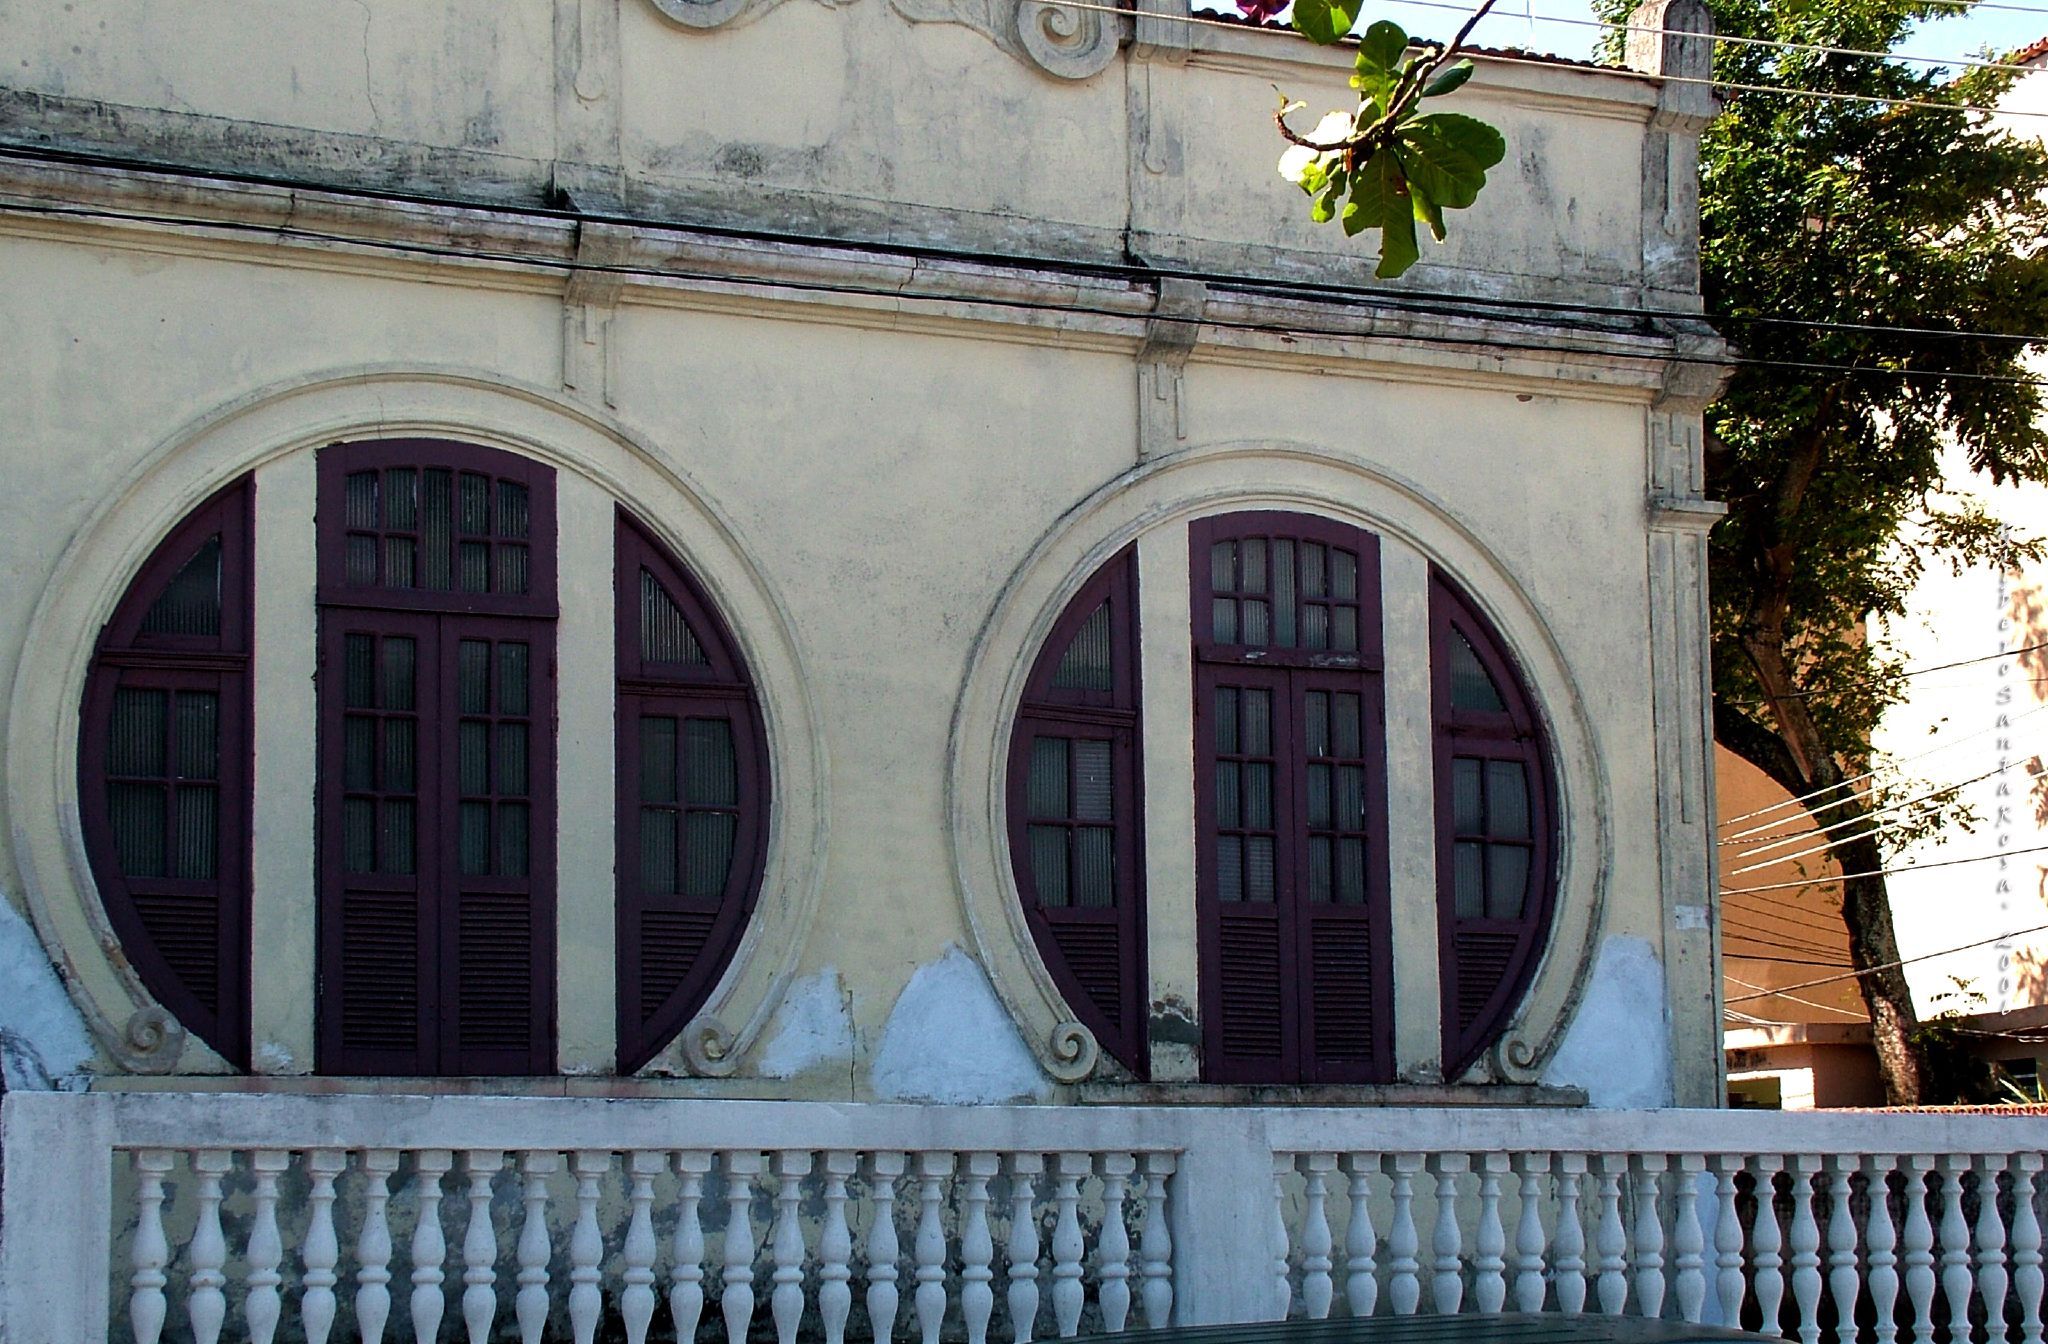 an old building with arched windows and arched wrought ironwork on it